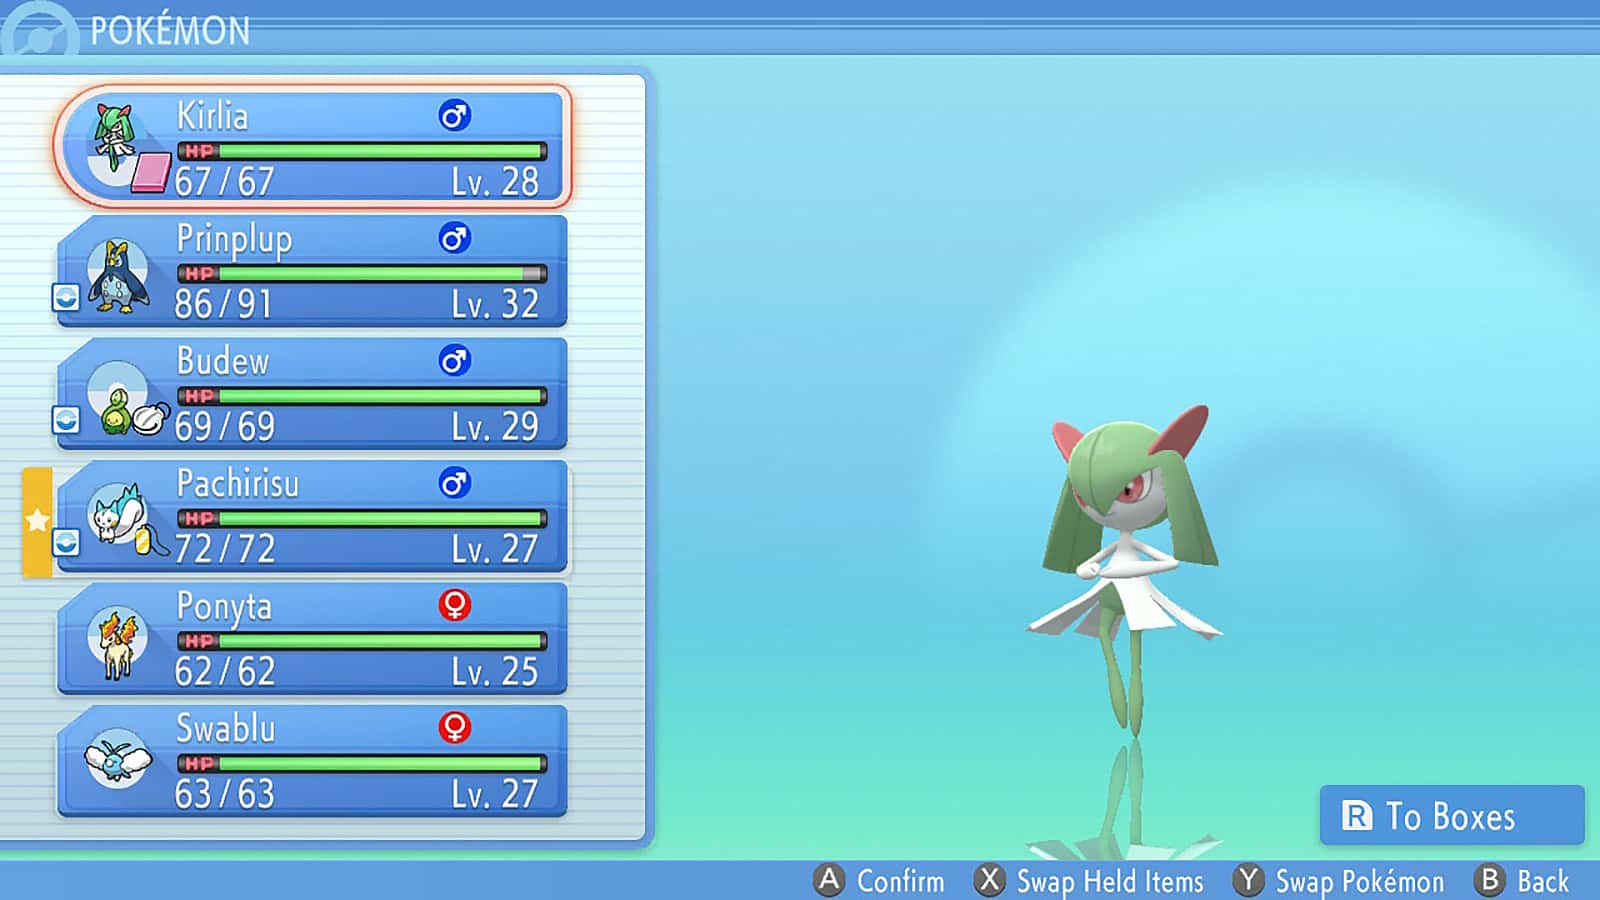 An image showing a party of Pokemon in Brilliant Diamond & Shining Pearl